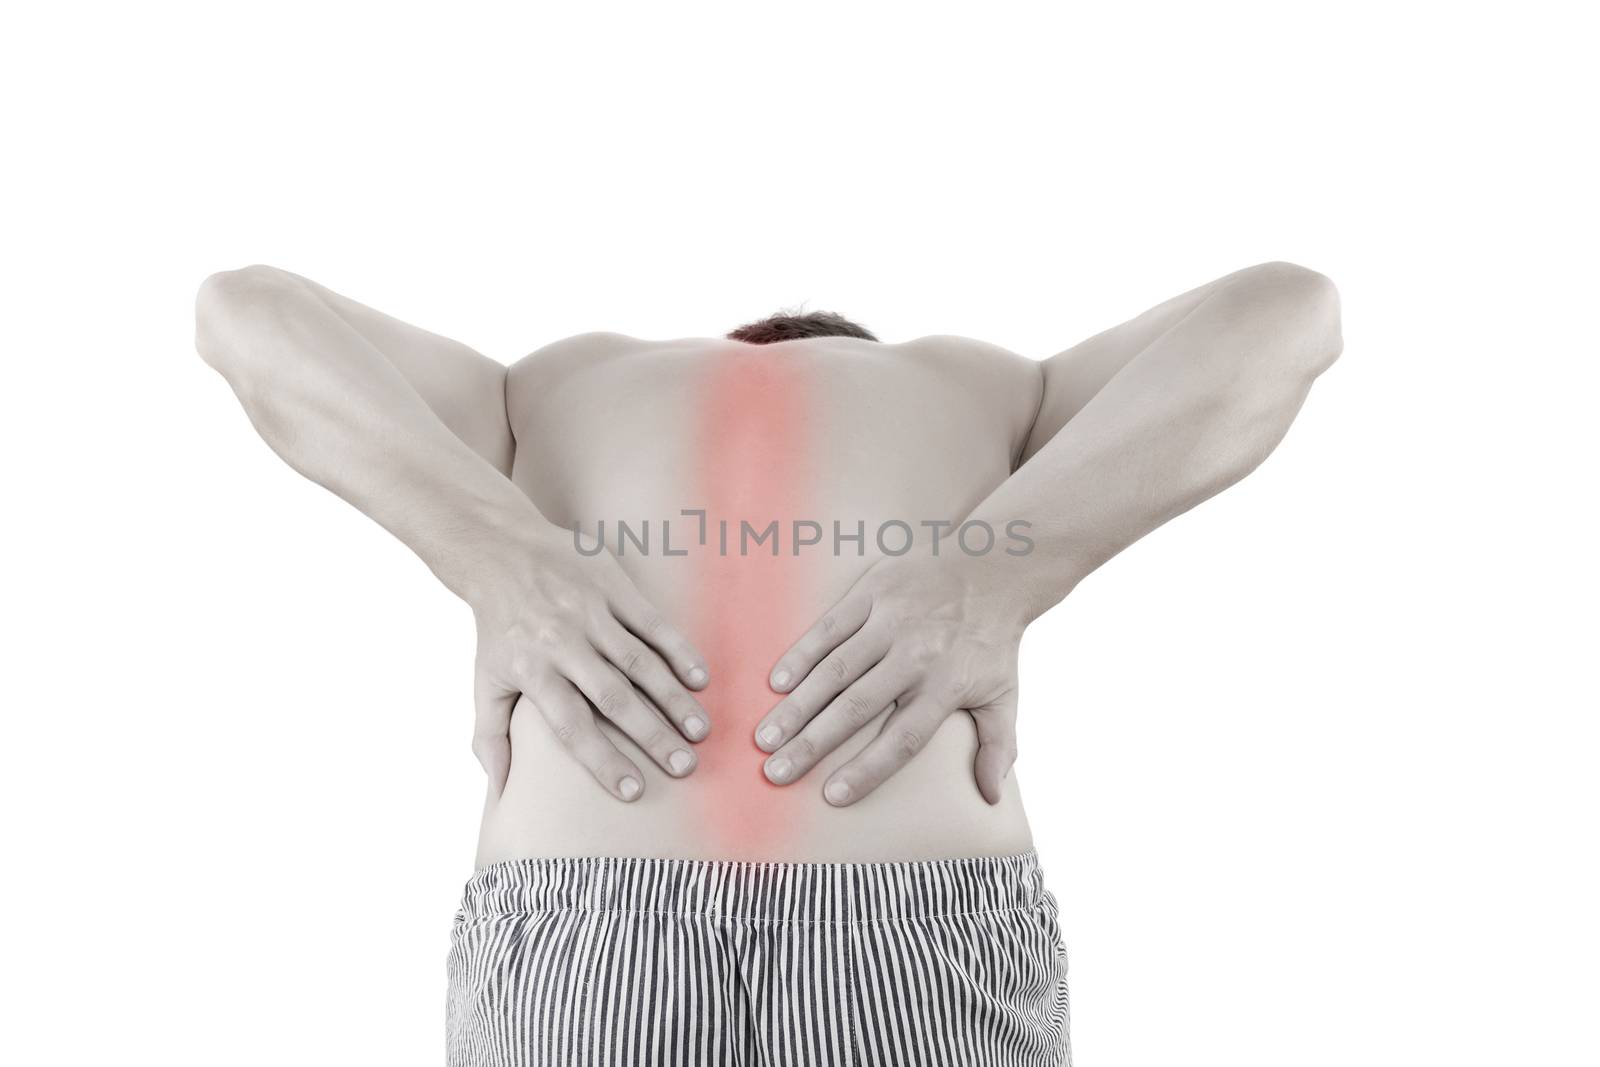 Back Pain. Handsome young man touching his sore back with highlighted area isolated on white background.